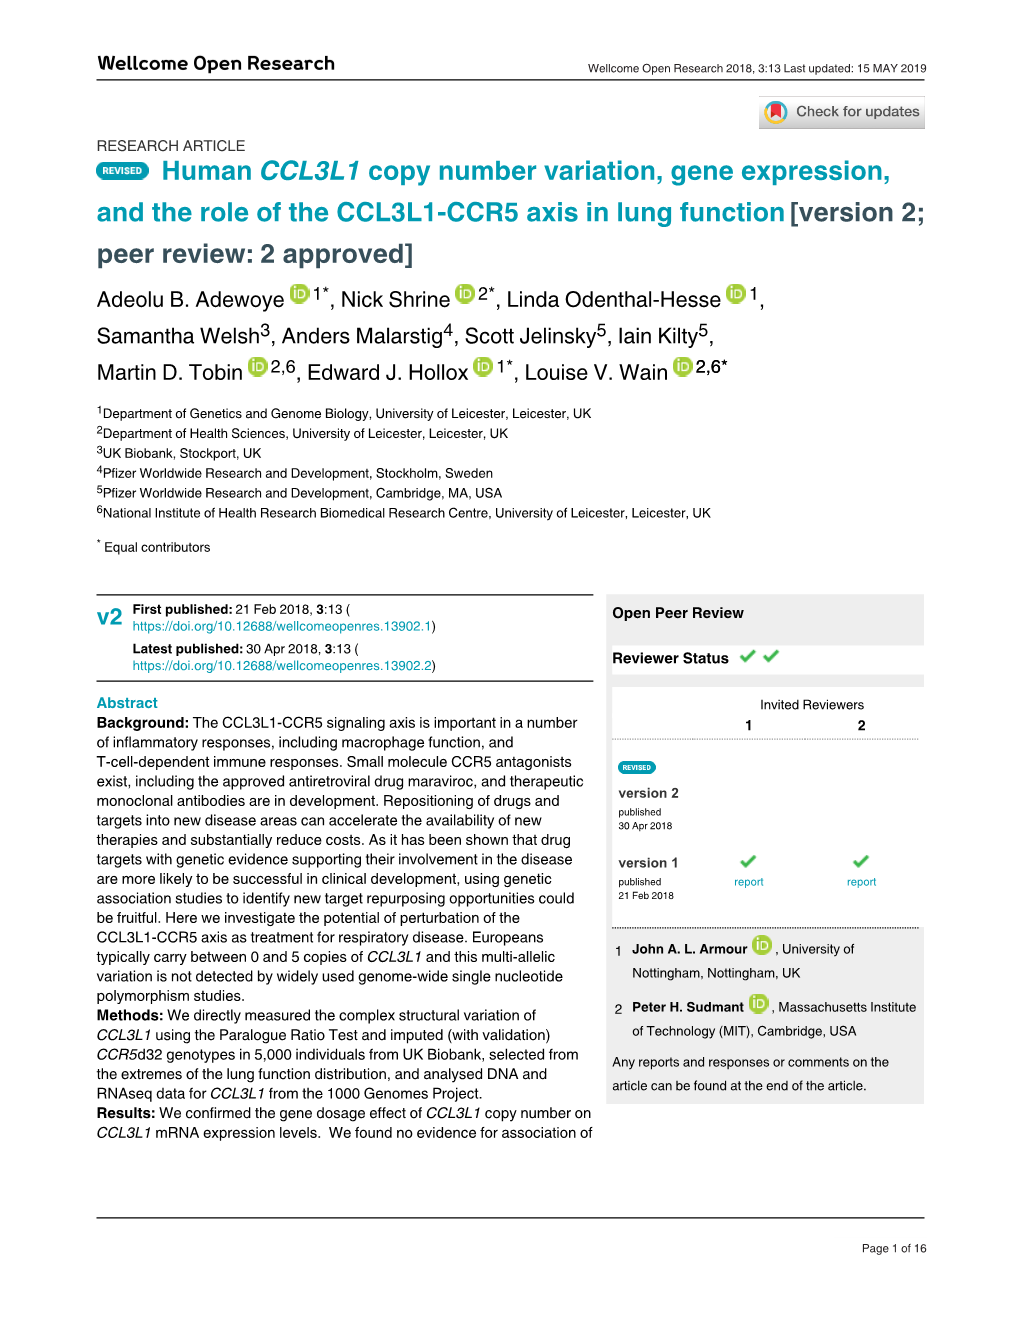 Copy Number Variation, Gene Expression, CCL3L1 and the Role Of